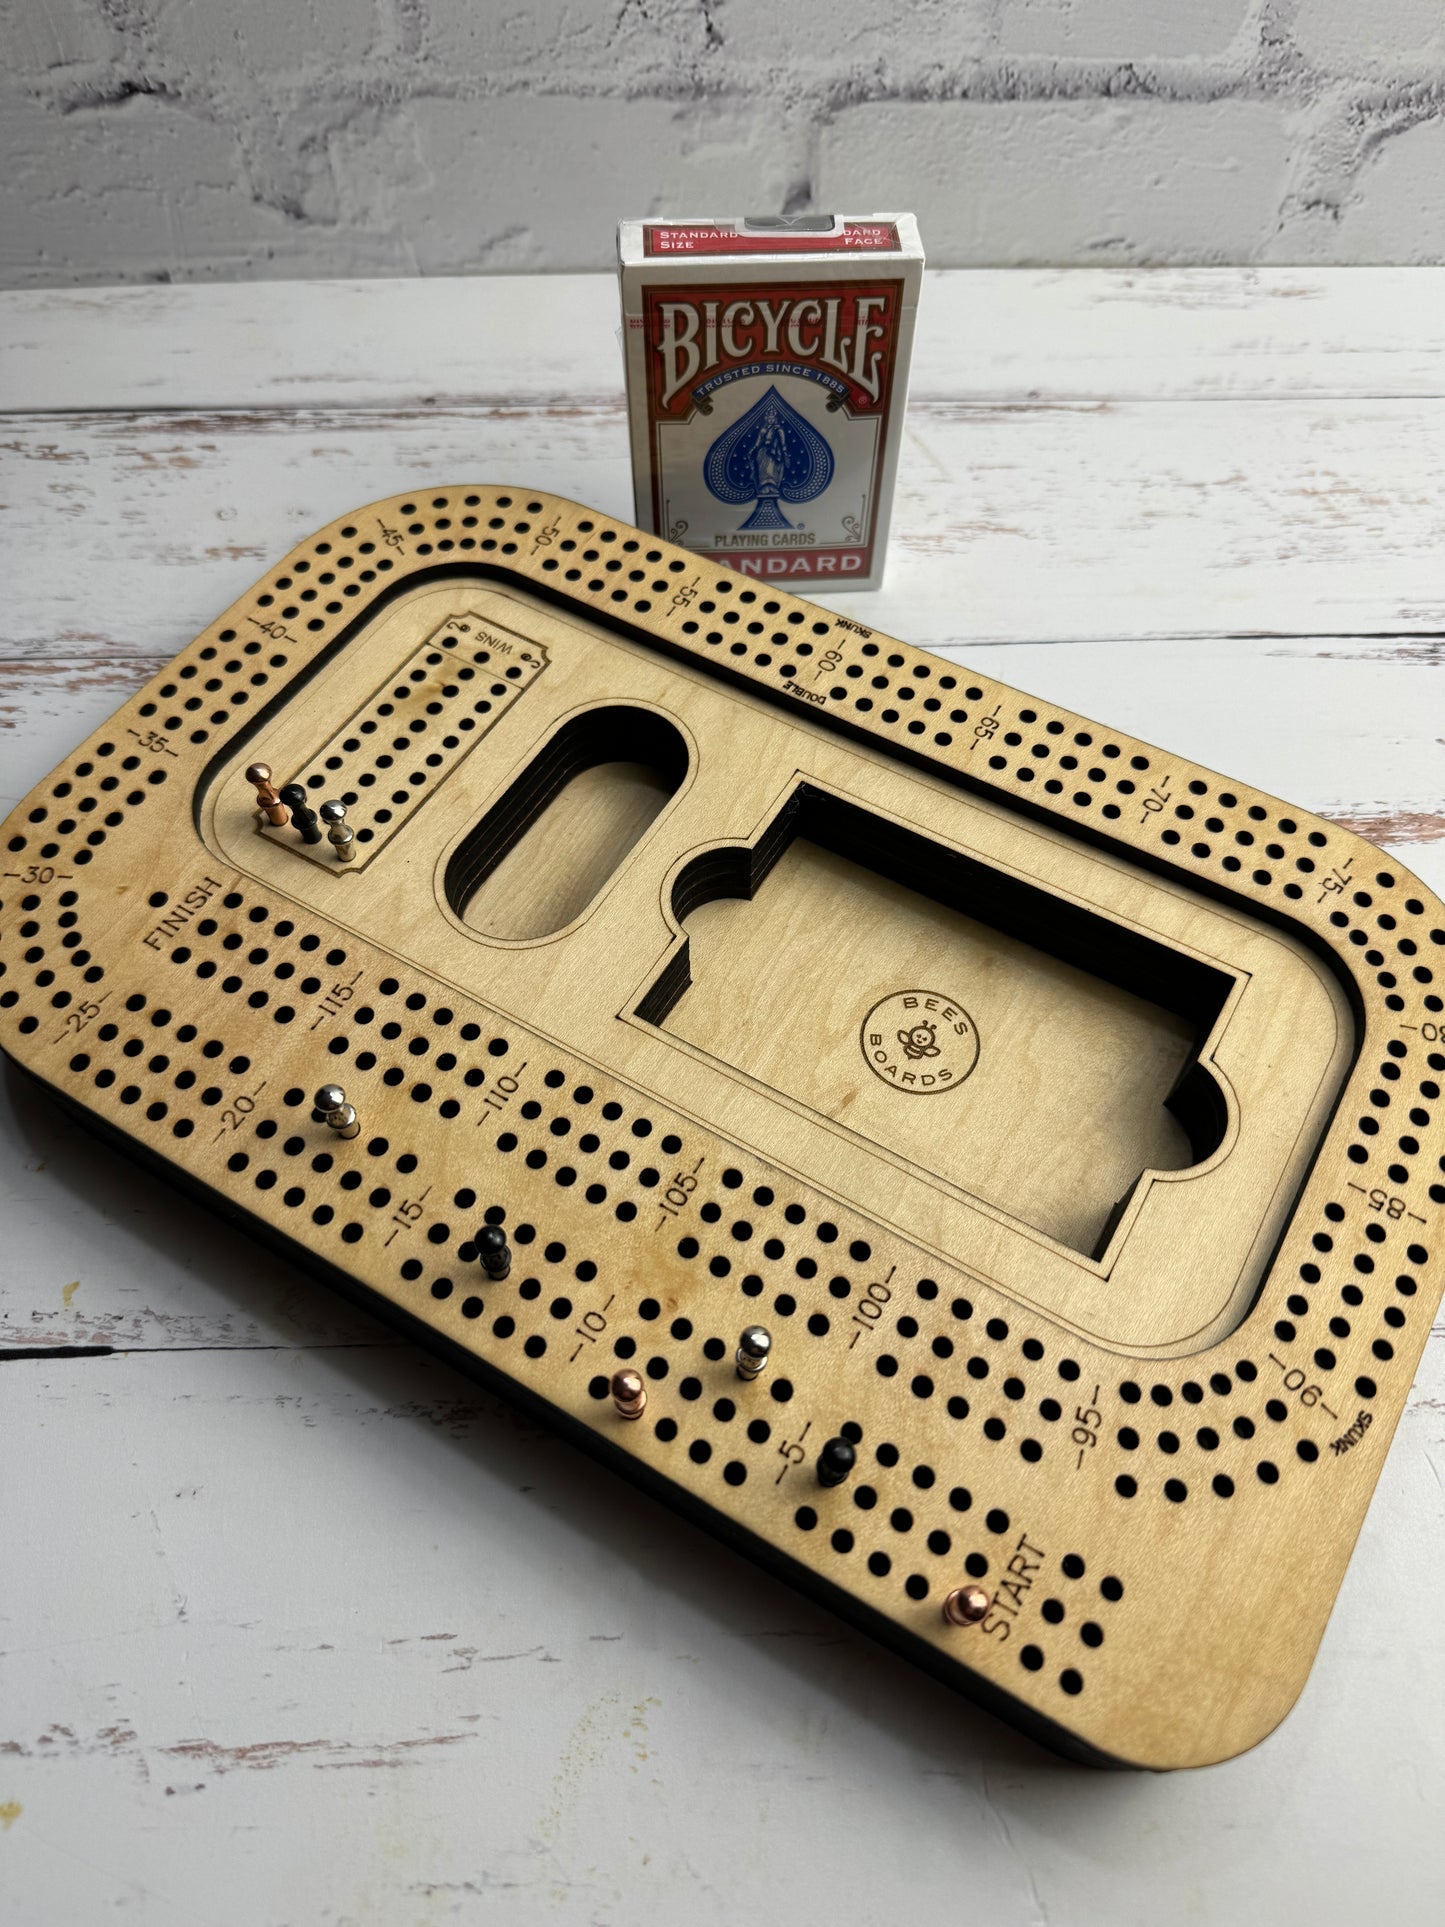 There's always time for cribbage